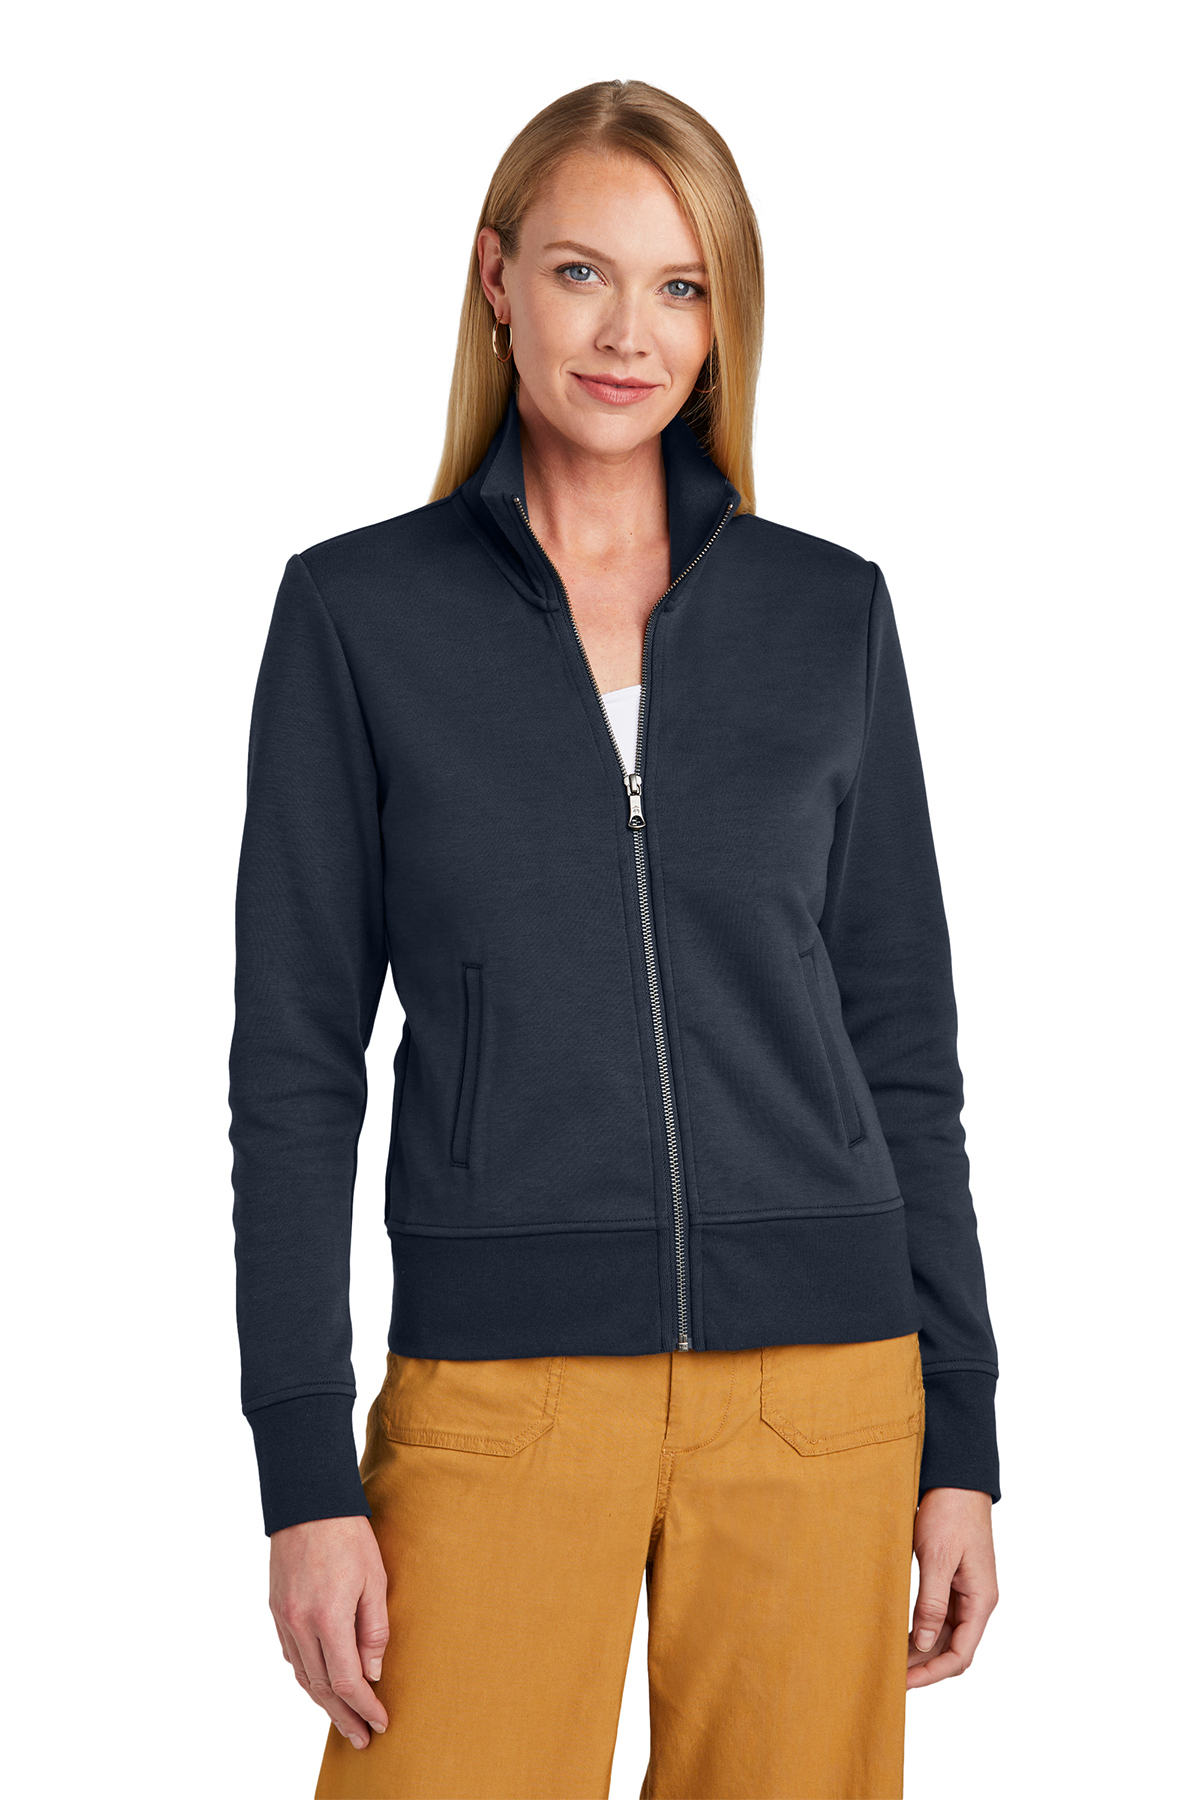 Brooks Brothers Women's Double Knit Full Zip   Product   SanMar